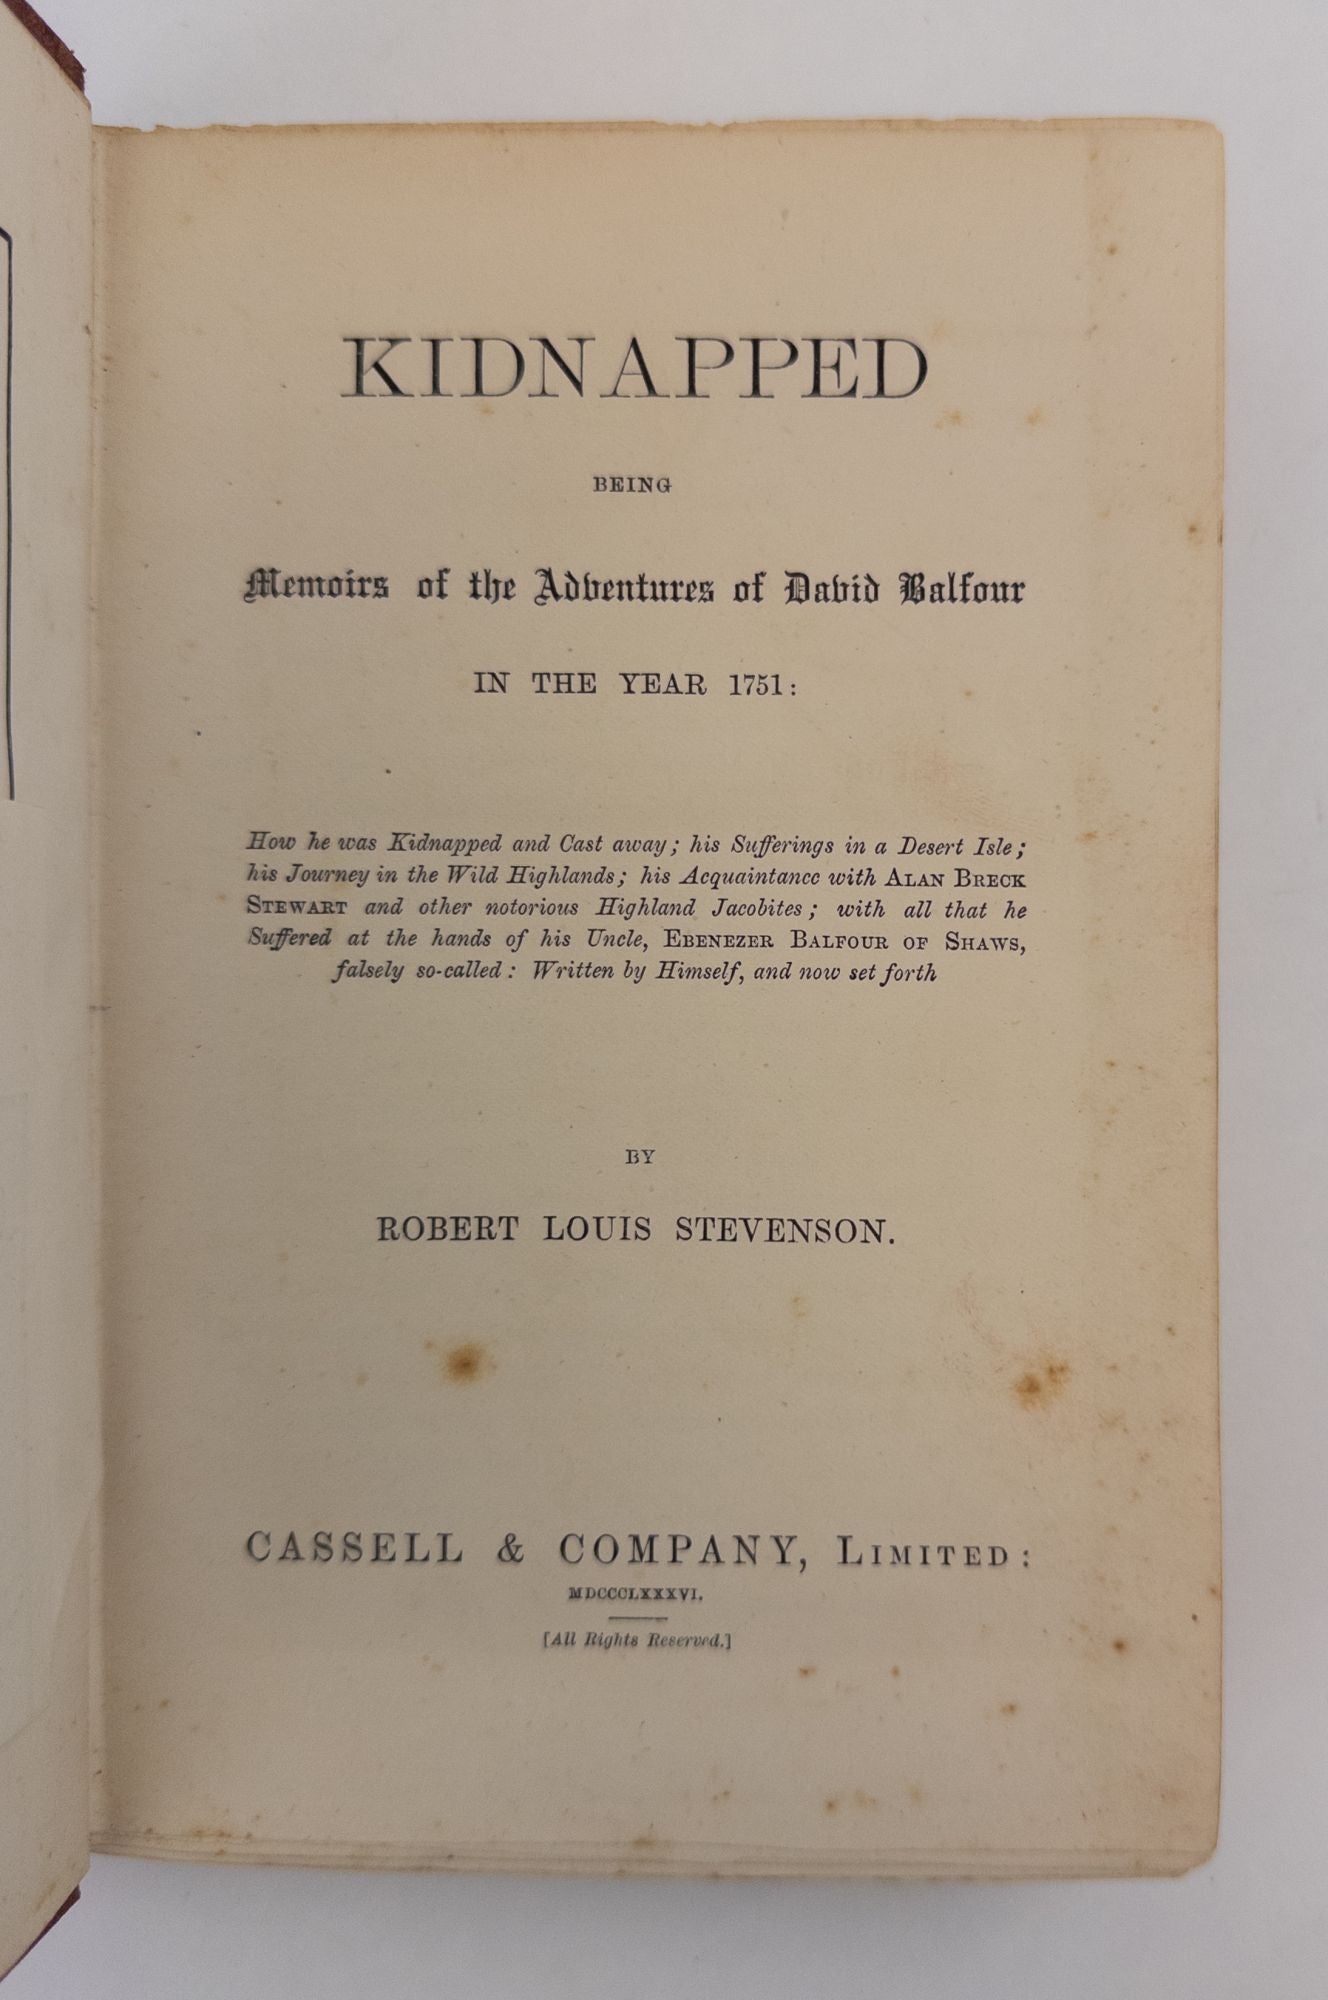 Product Image for KIDNAPPED BEING MEMOIRS OF THE ADVENTURES OF DAVID BALFOUR IN THE YEAR 1951